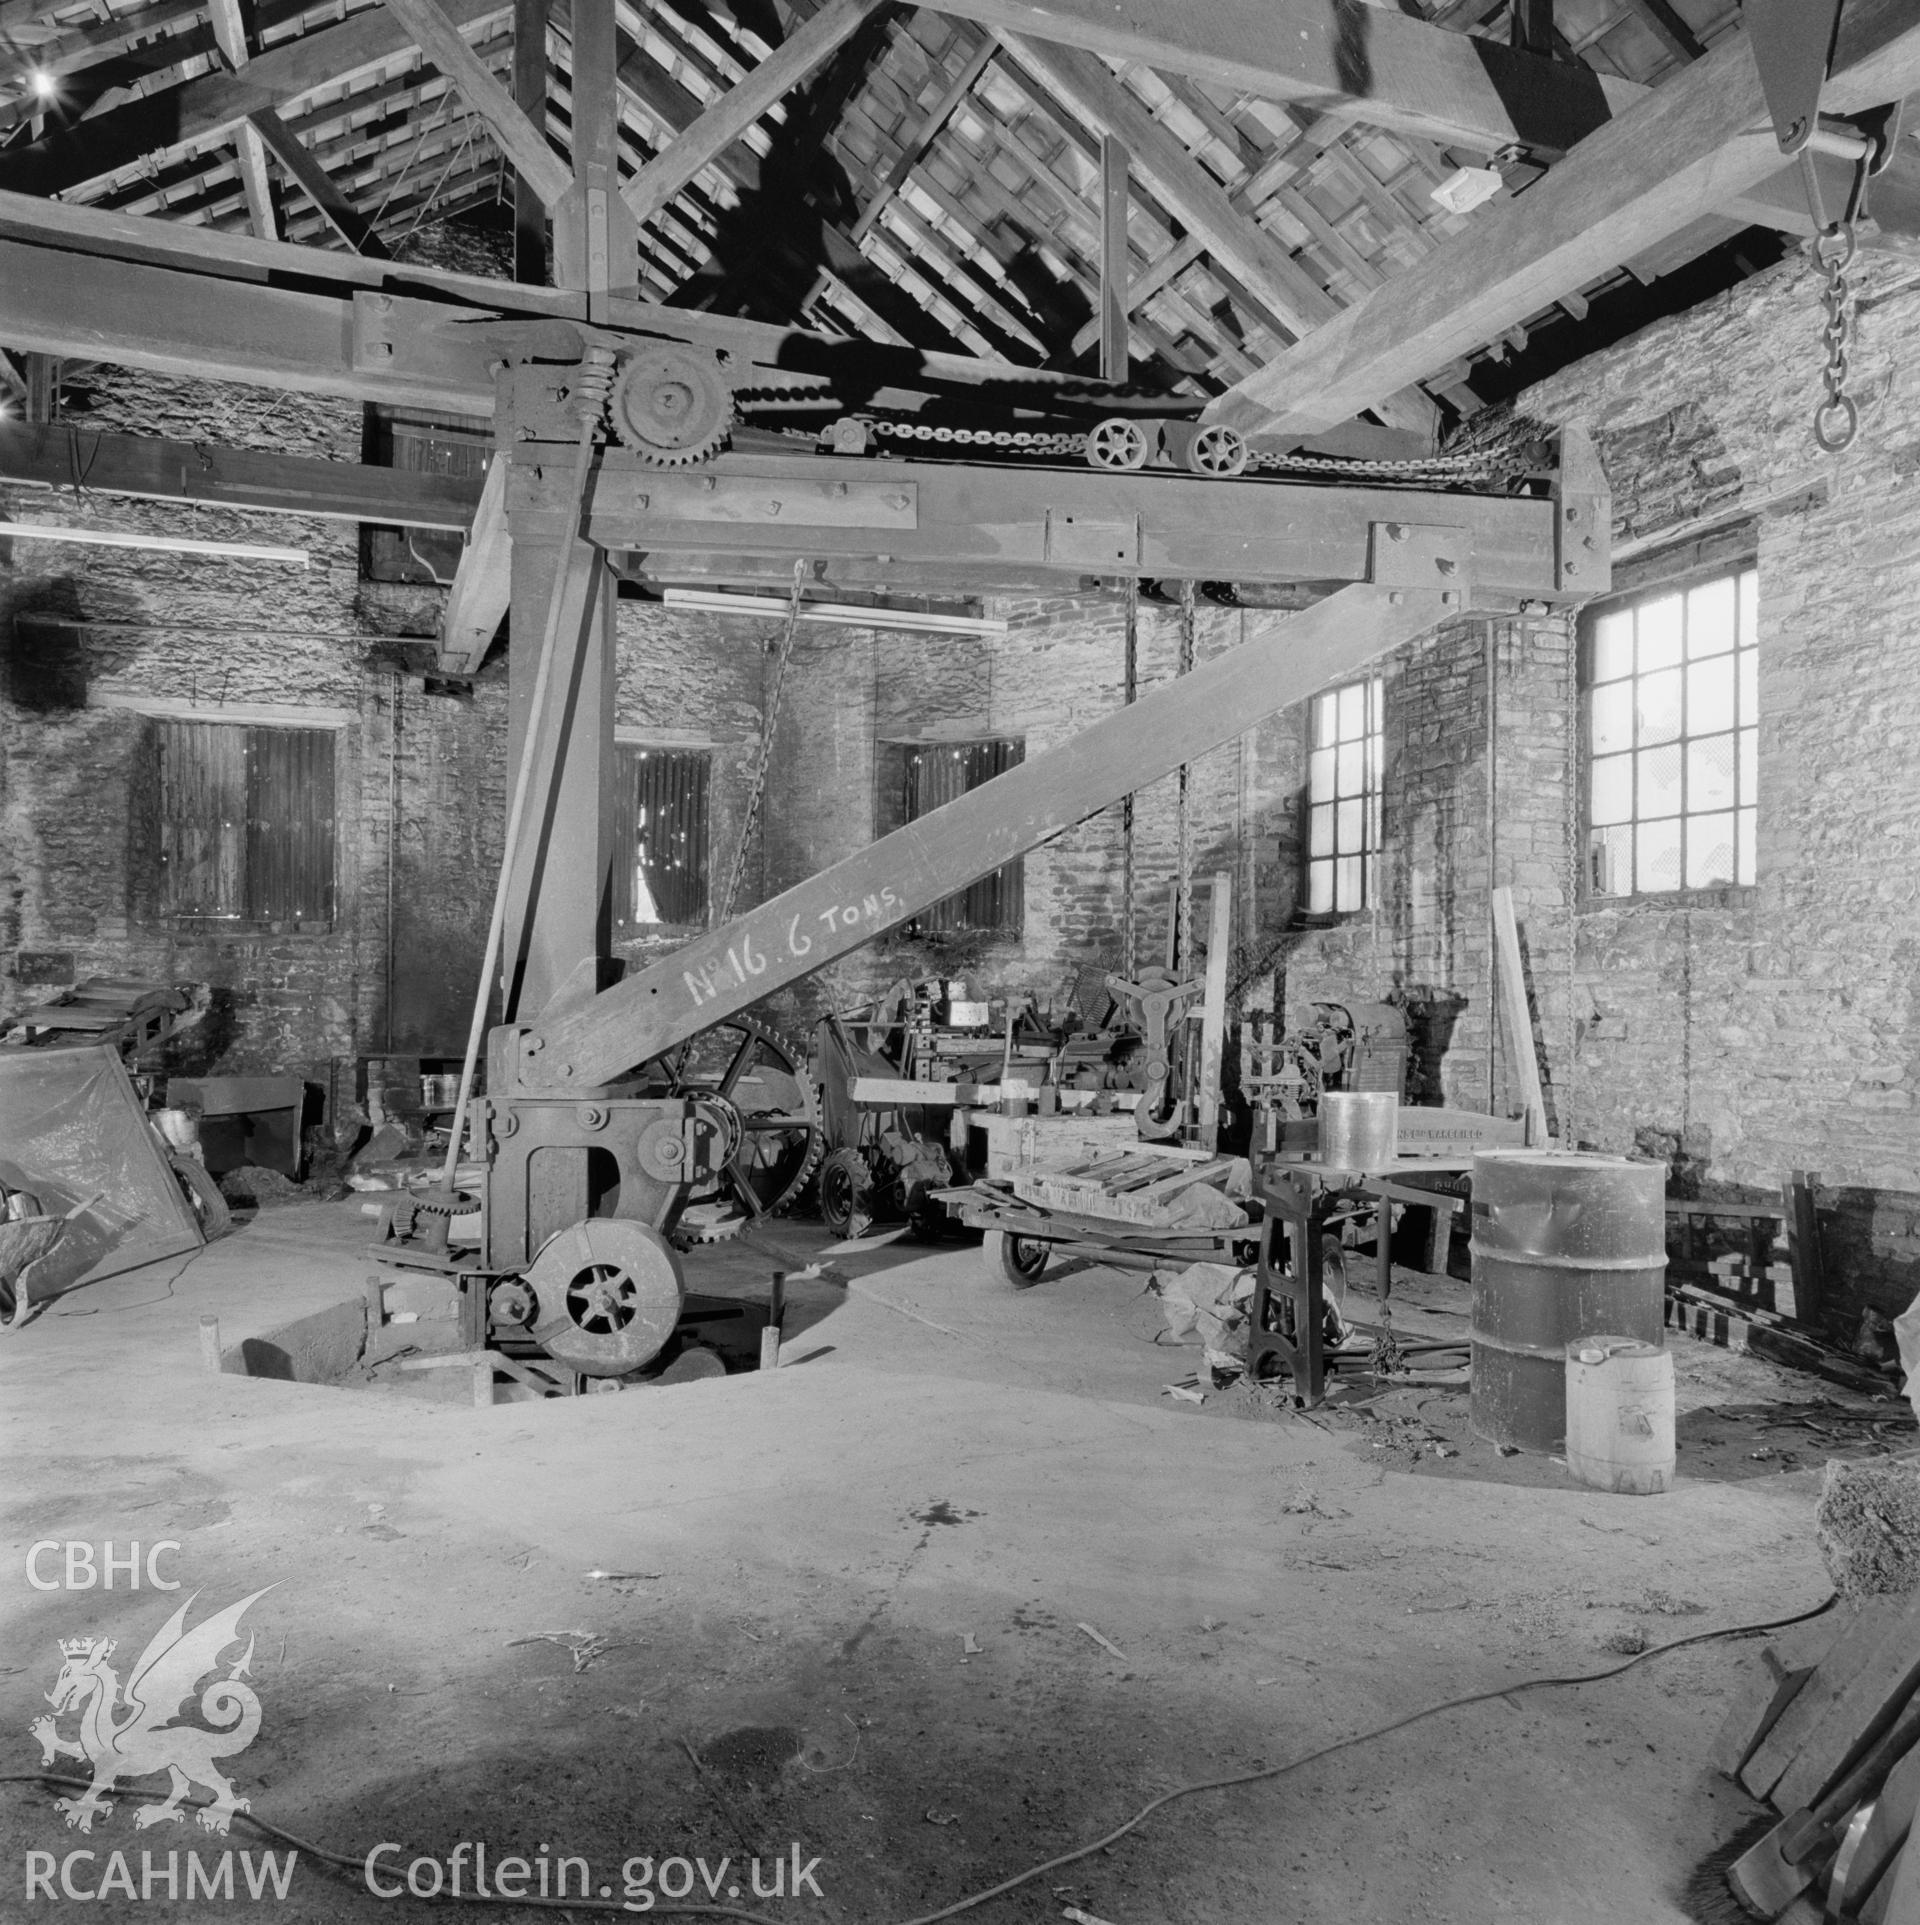 Digital copy of a black and white negative showing the crane at Player's Works Foundry, Clydach, taken by RCAHMW, undated.